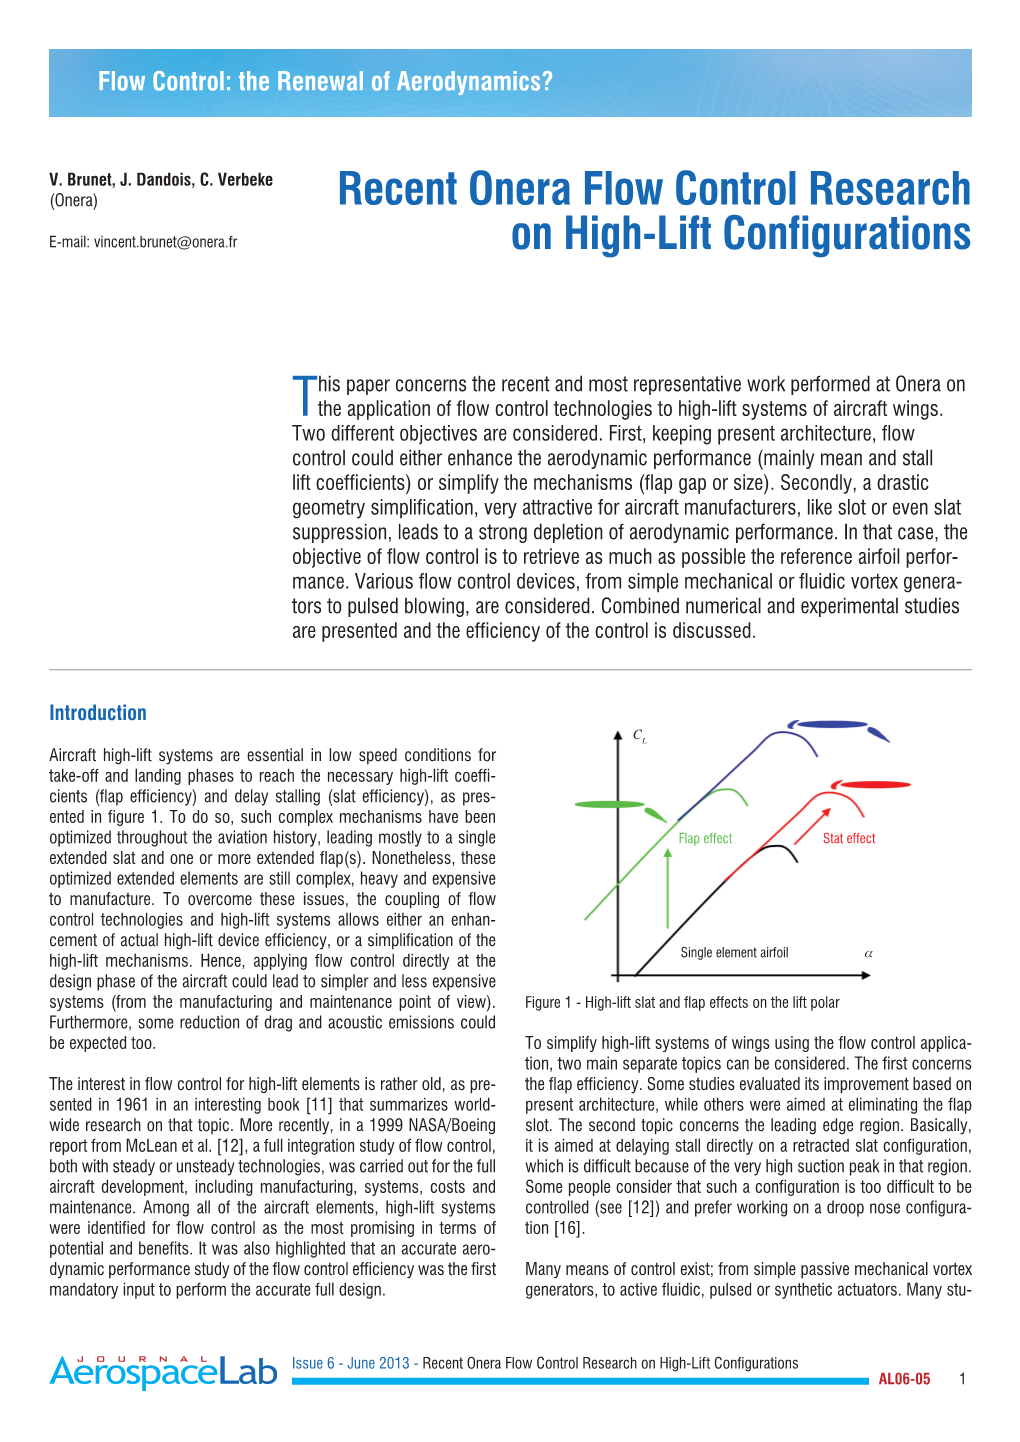 Recent Onera Flow Control Research on High-Lift Configurations